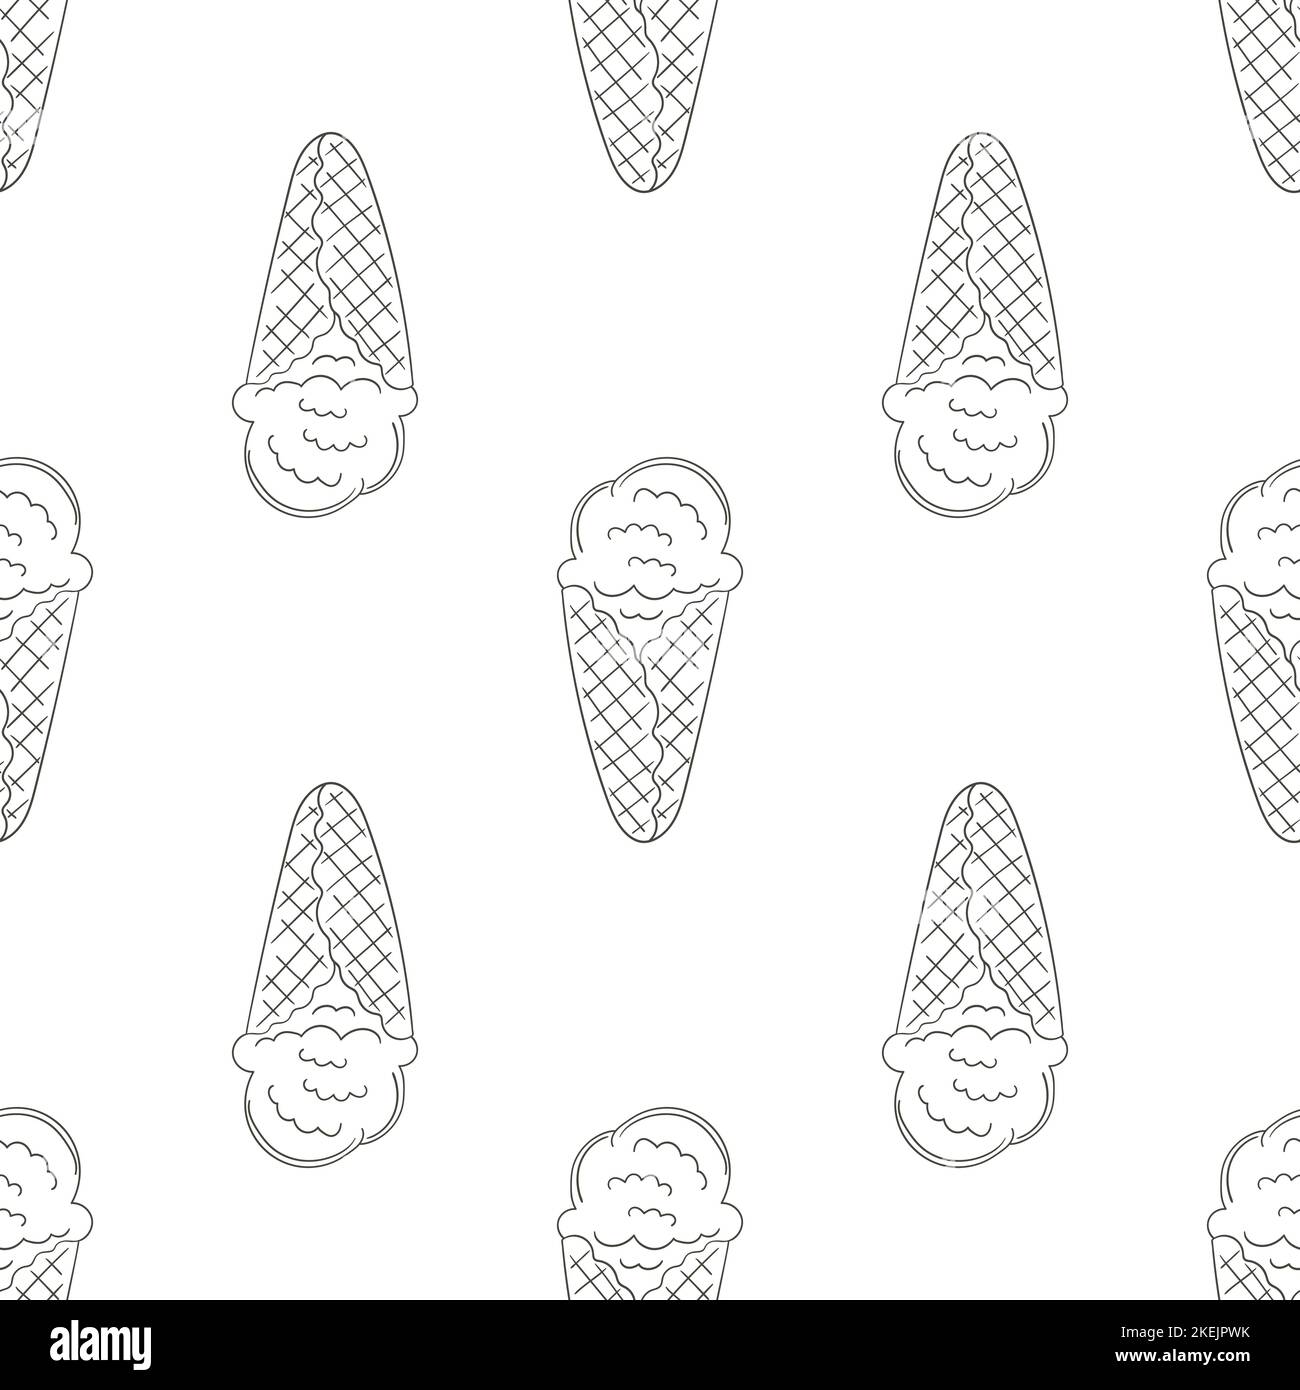 Summer. Coloring ice cream seamless pattern. Wonderful bright pattern with sweet cold dessert. Print Stock Vector